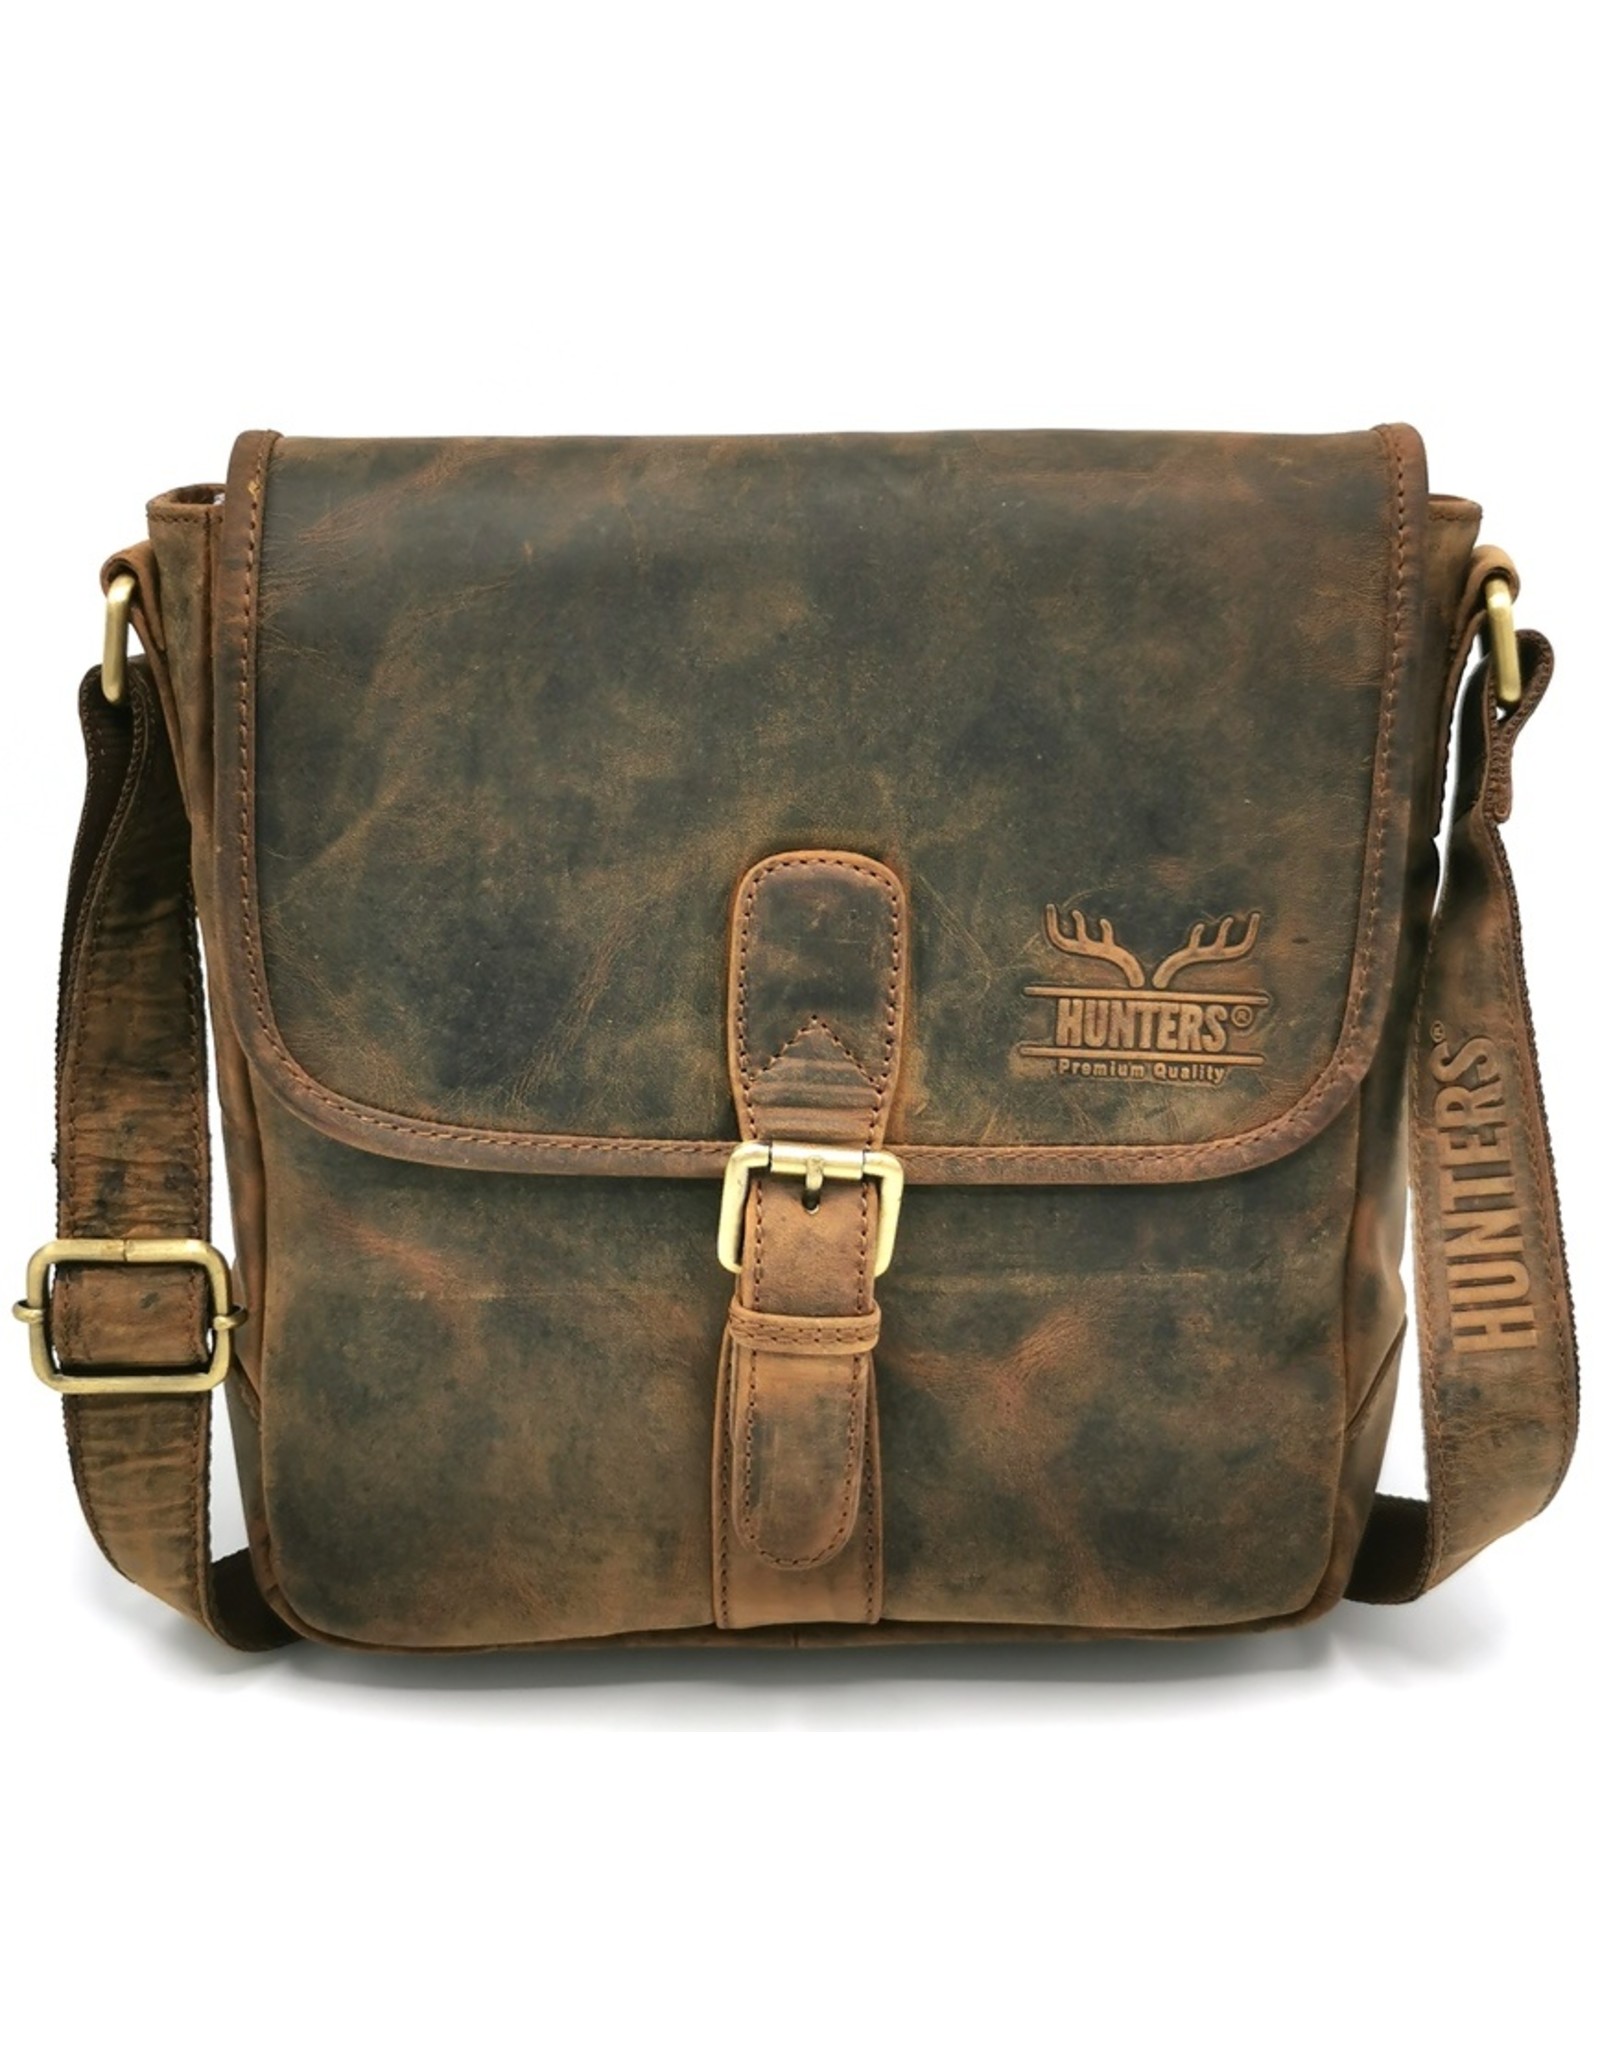 Hunters Leather Shoulder bags  Leather crossbody bags - Hunters Leather Shoulder bag with cover Buffulo Leather